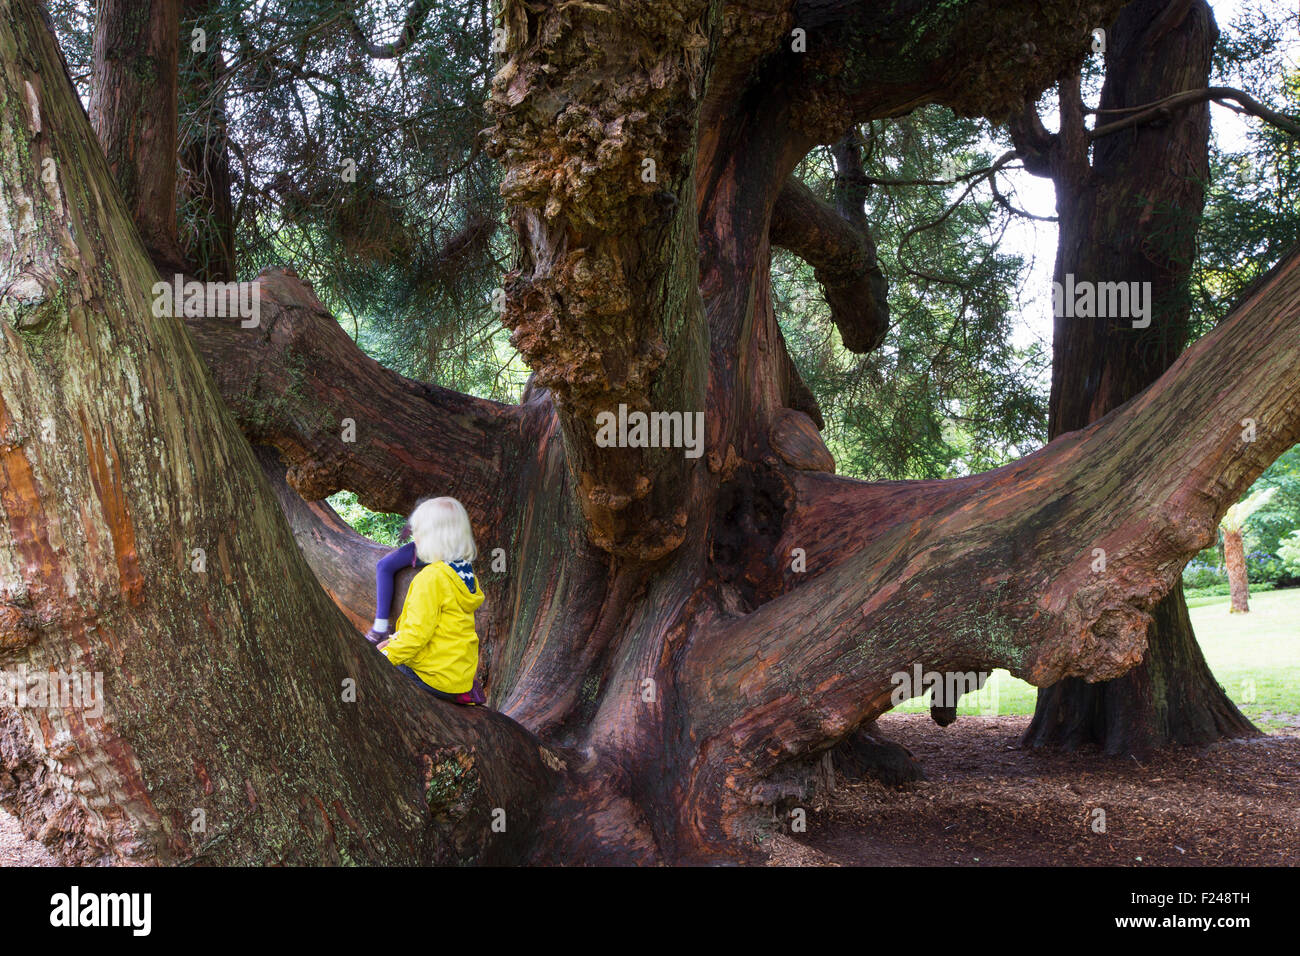 An ancient Cyprus tree in Trelissick Gardens near Falmouth, Cornwall, UK. Stock Photo